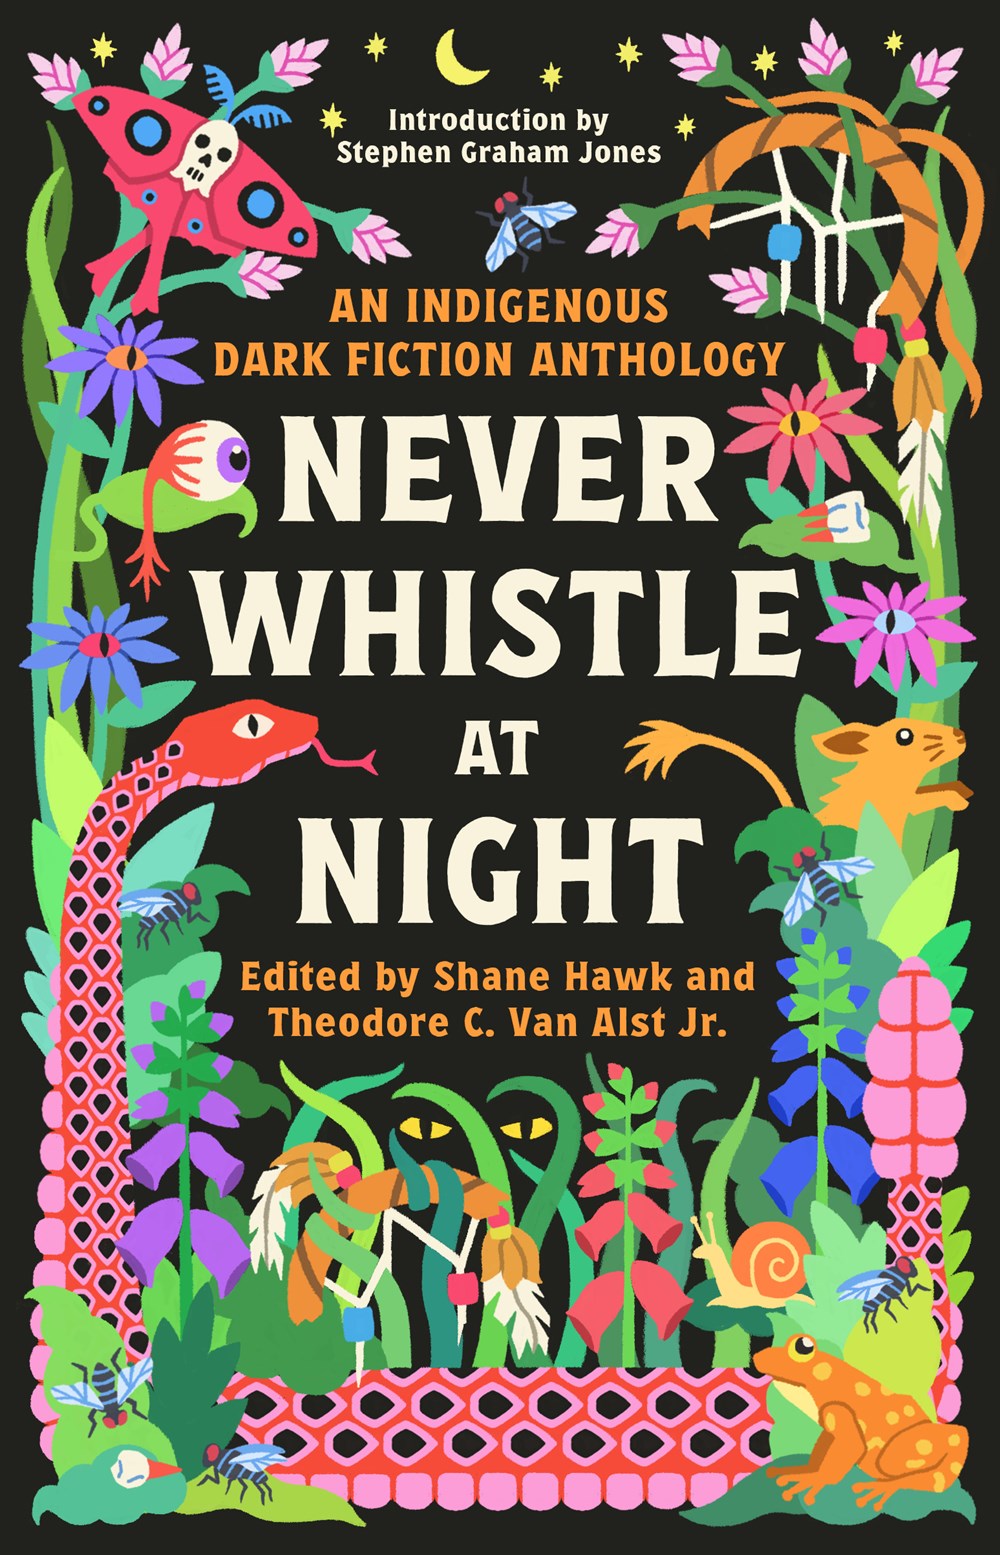 Never Whistle At Night: An Indigenous Dark Fiction Anthology edited by Shane Hawk and Theodore C. Van Alst Jr. (Paperback)